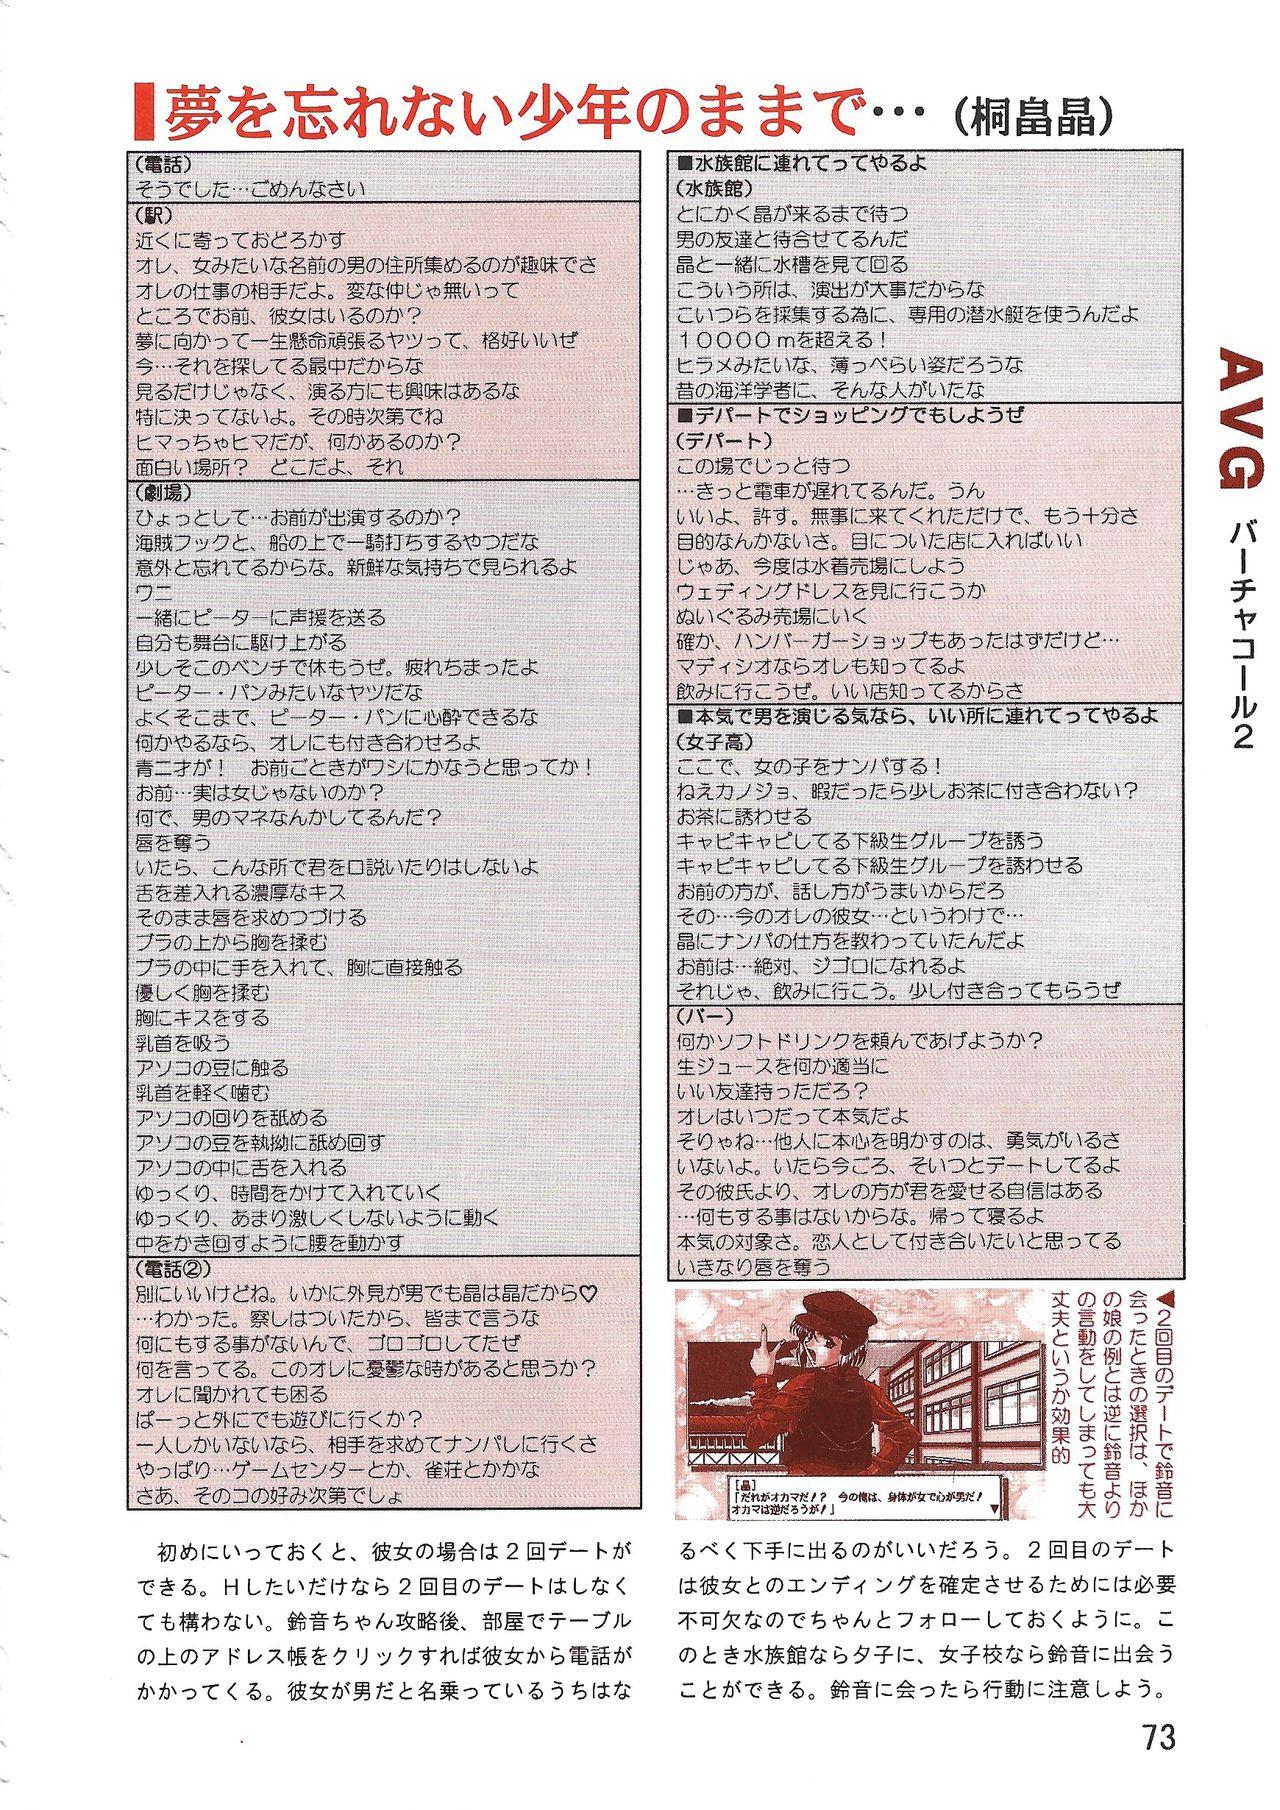 PC Bishoujo Software Strategy Book: Strategy King 2 72